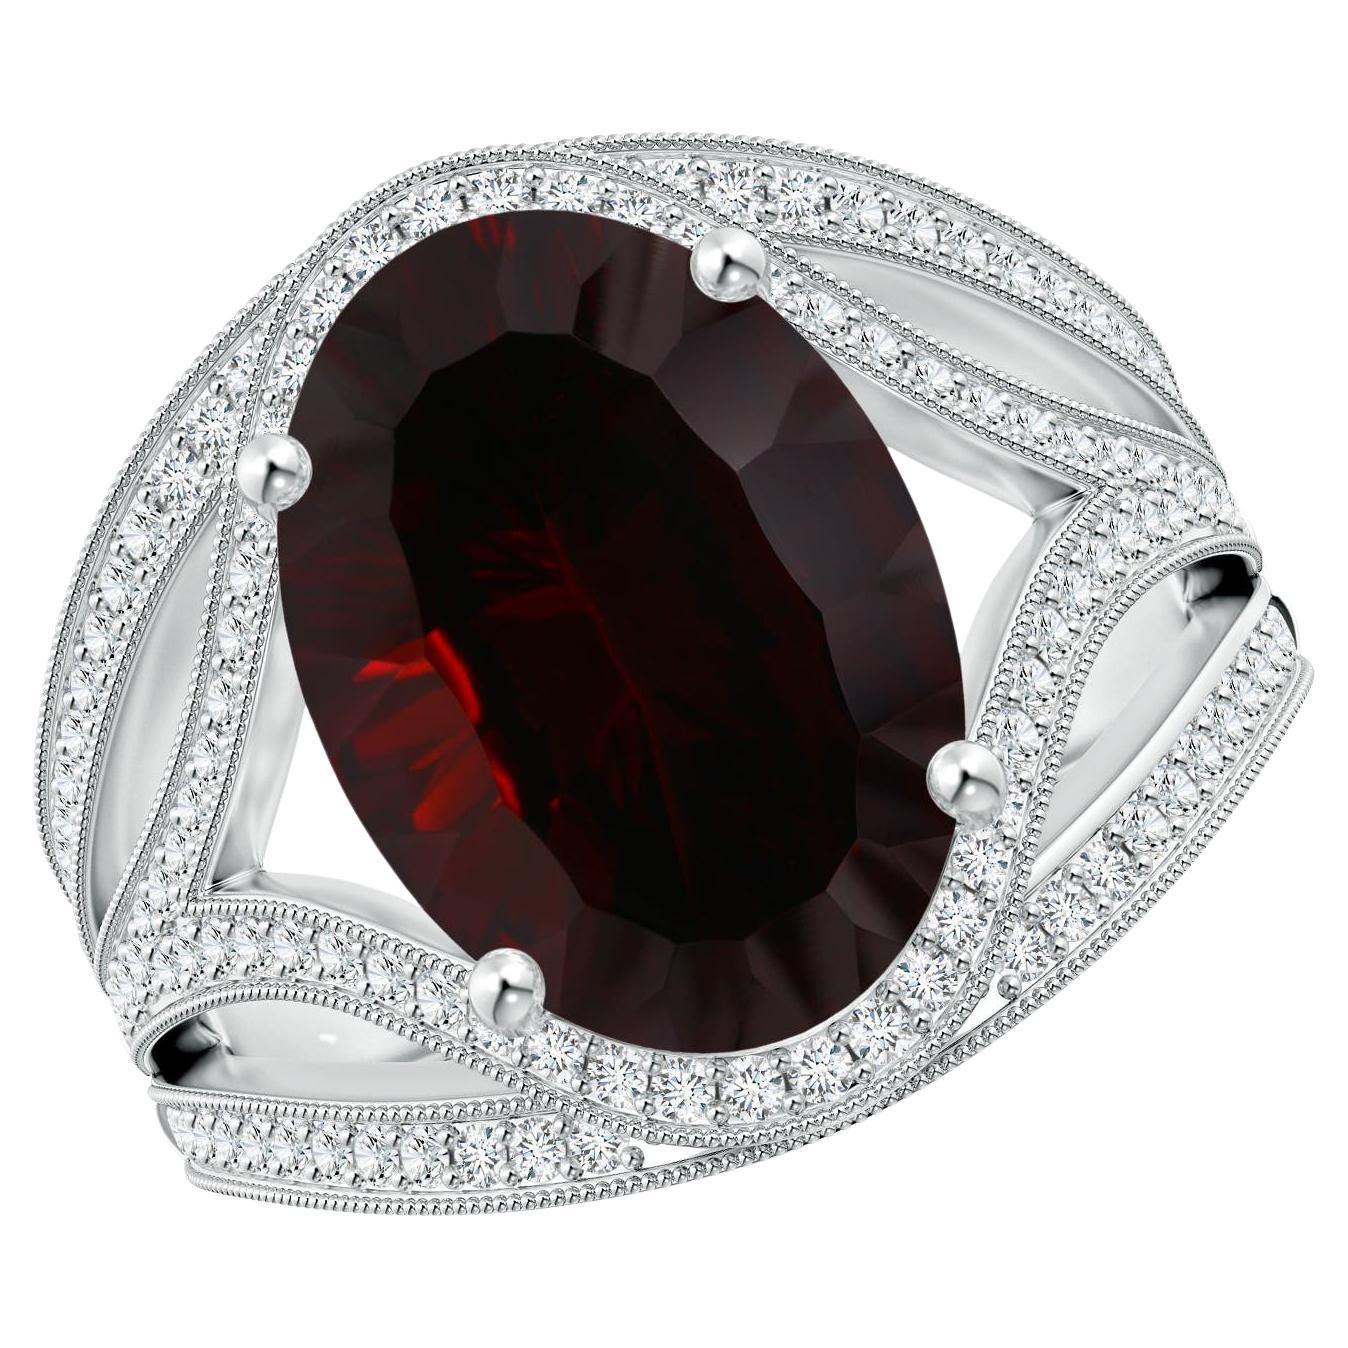 GIA Certified Natural Oval Garnet Ornate Shank Cocktail White Gold Ring